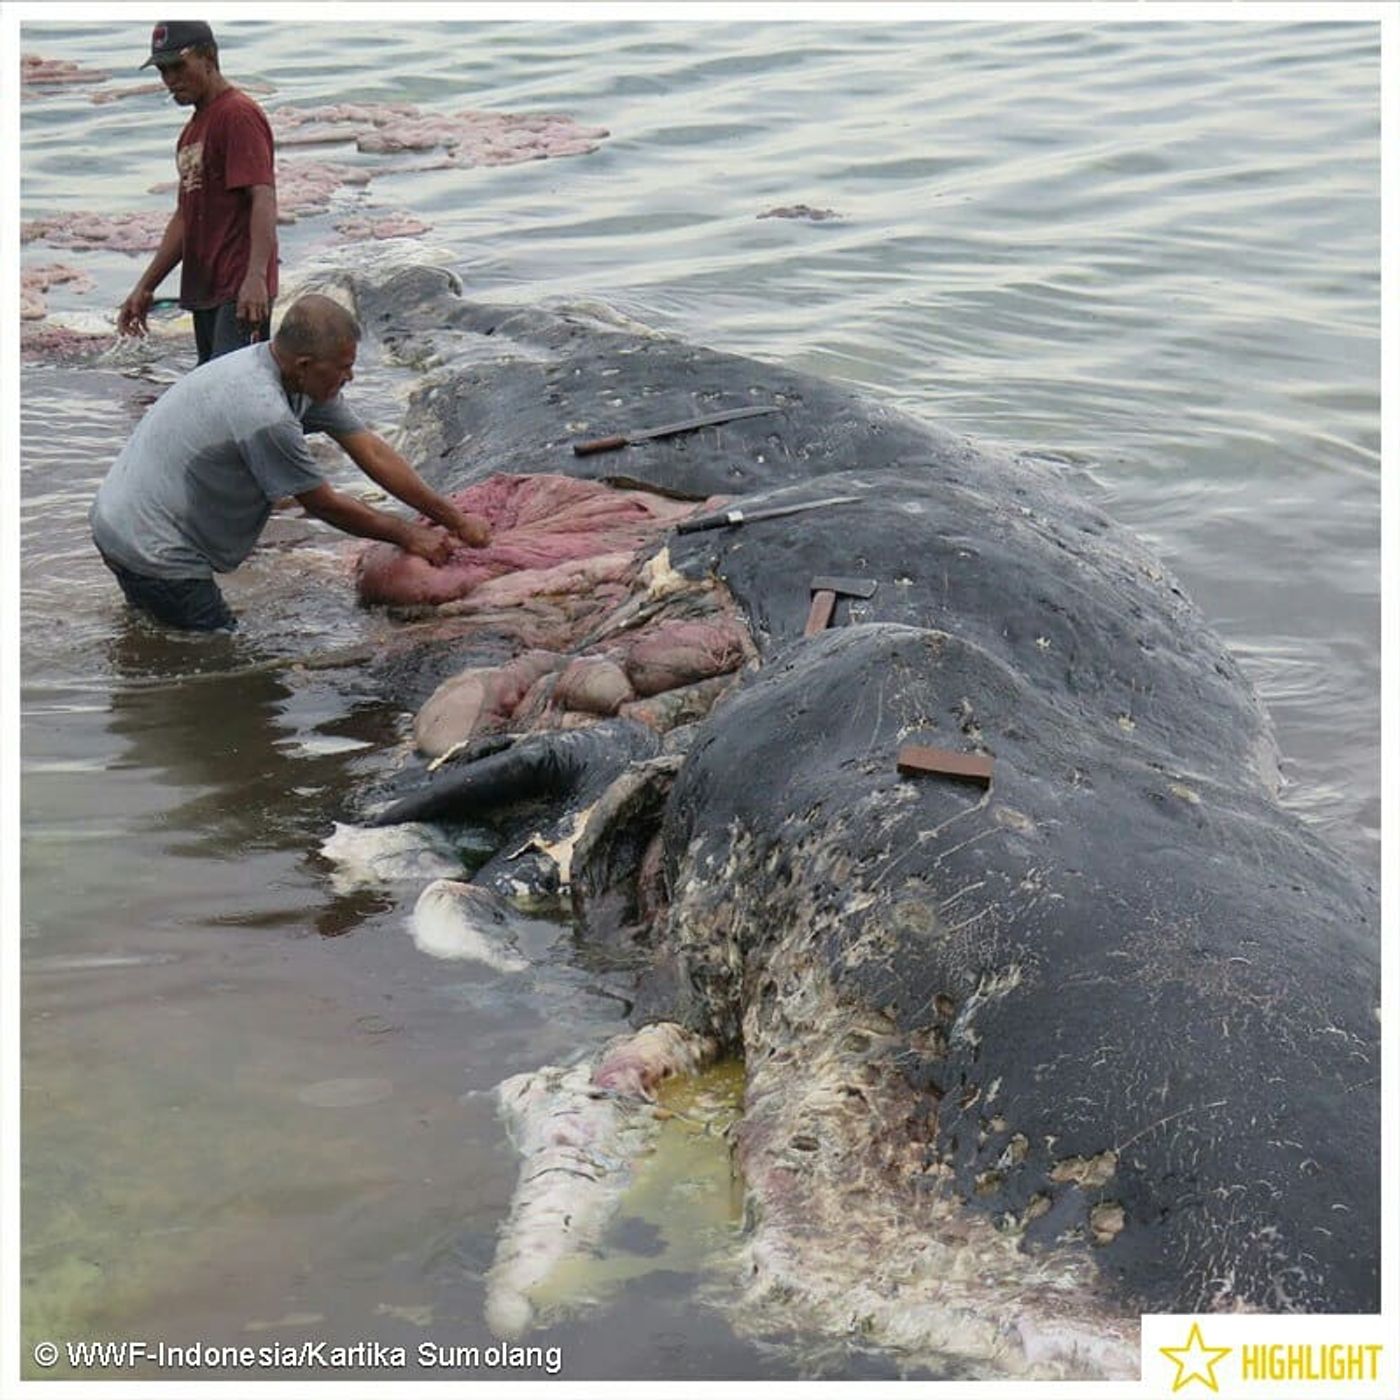 A deceased whale is investigated after being found on the shoreline of an Indonesian National Park.